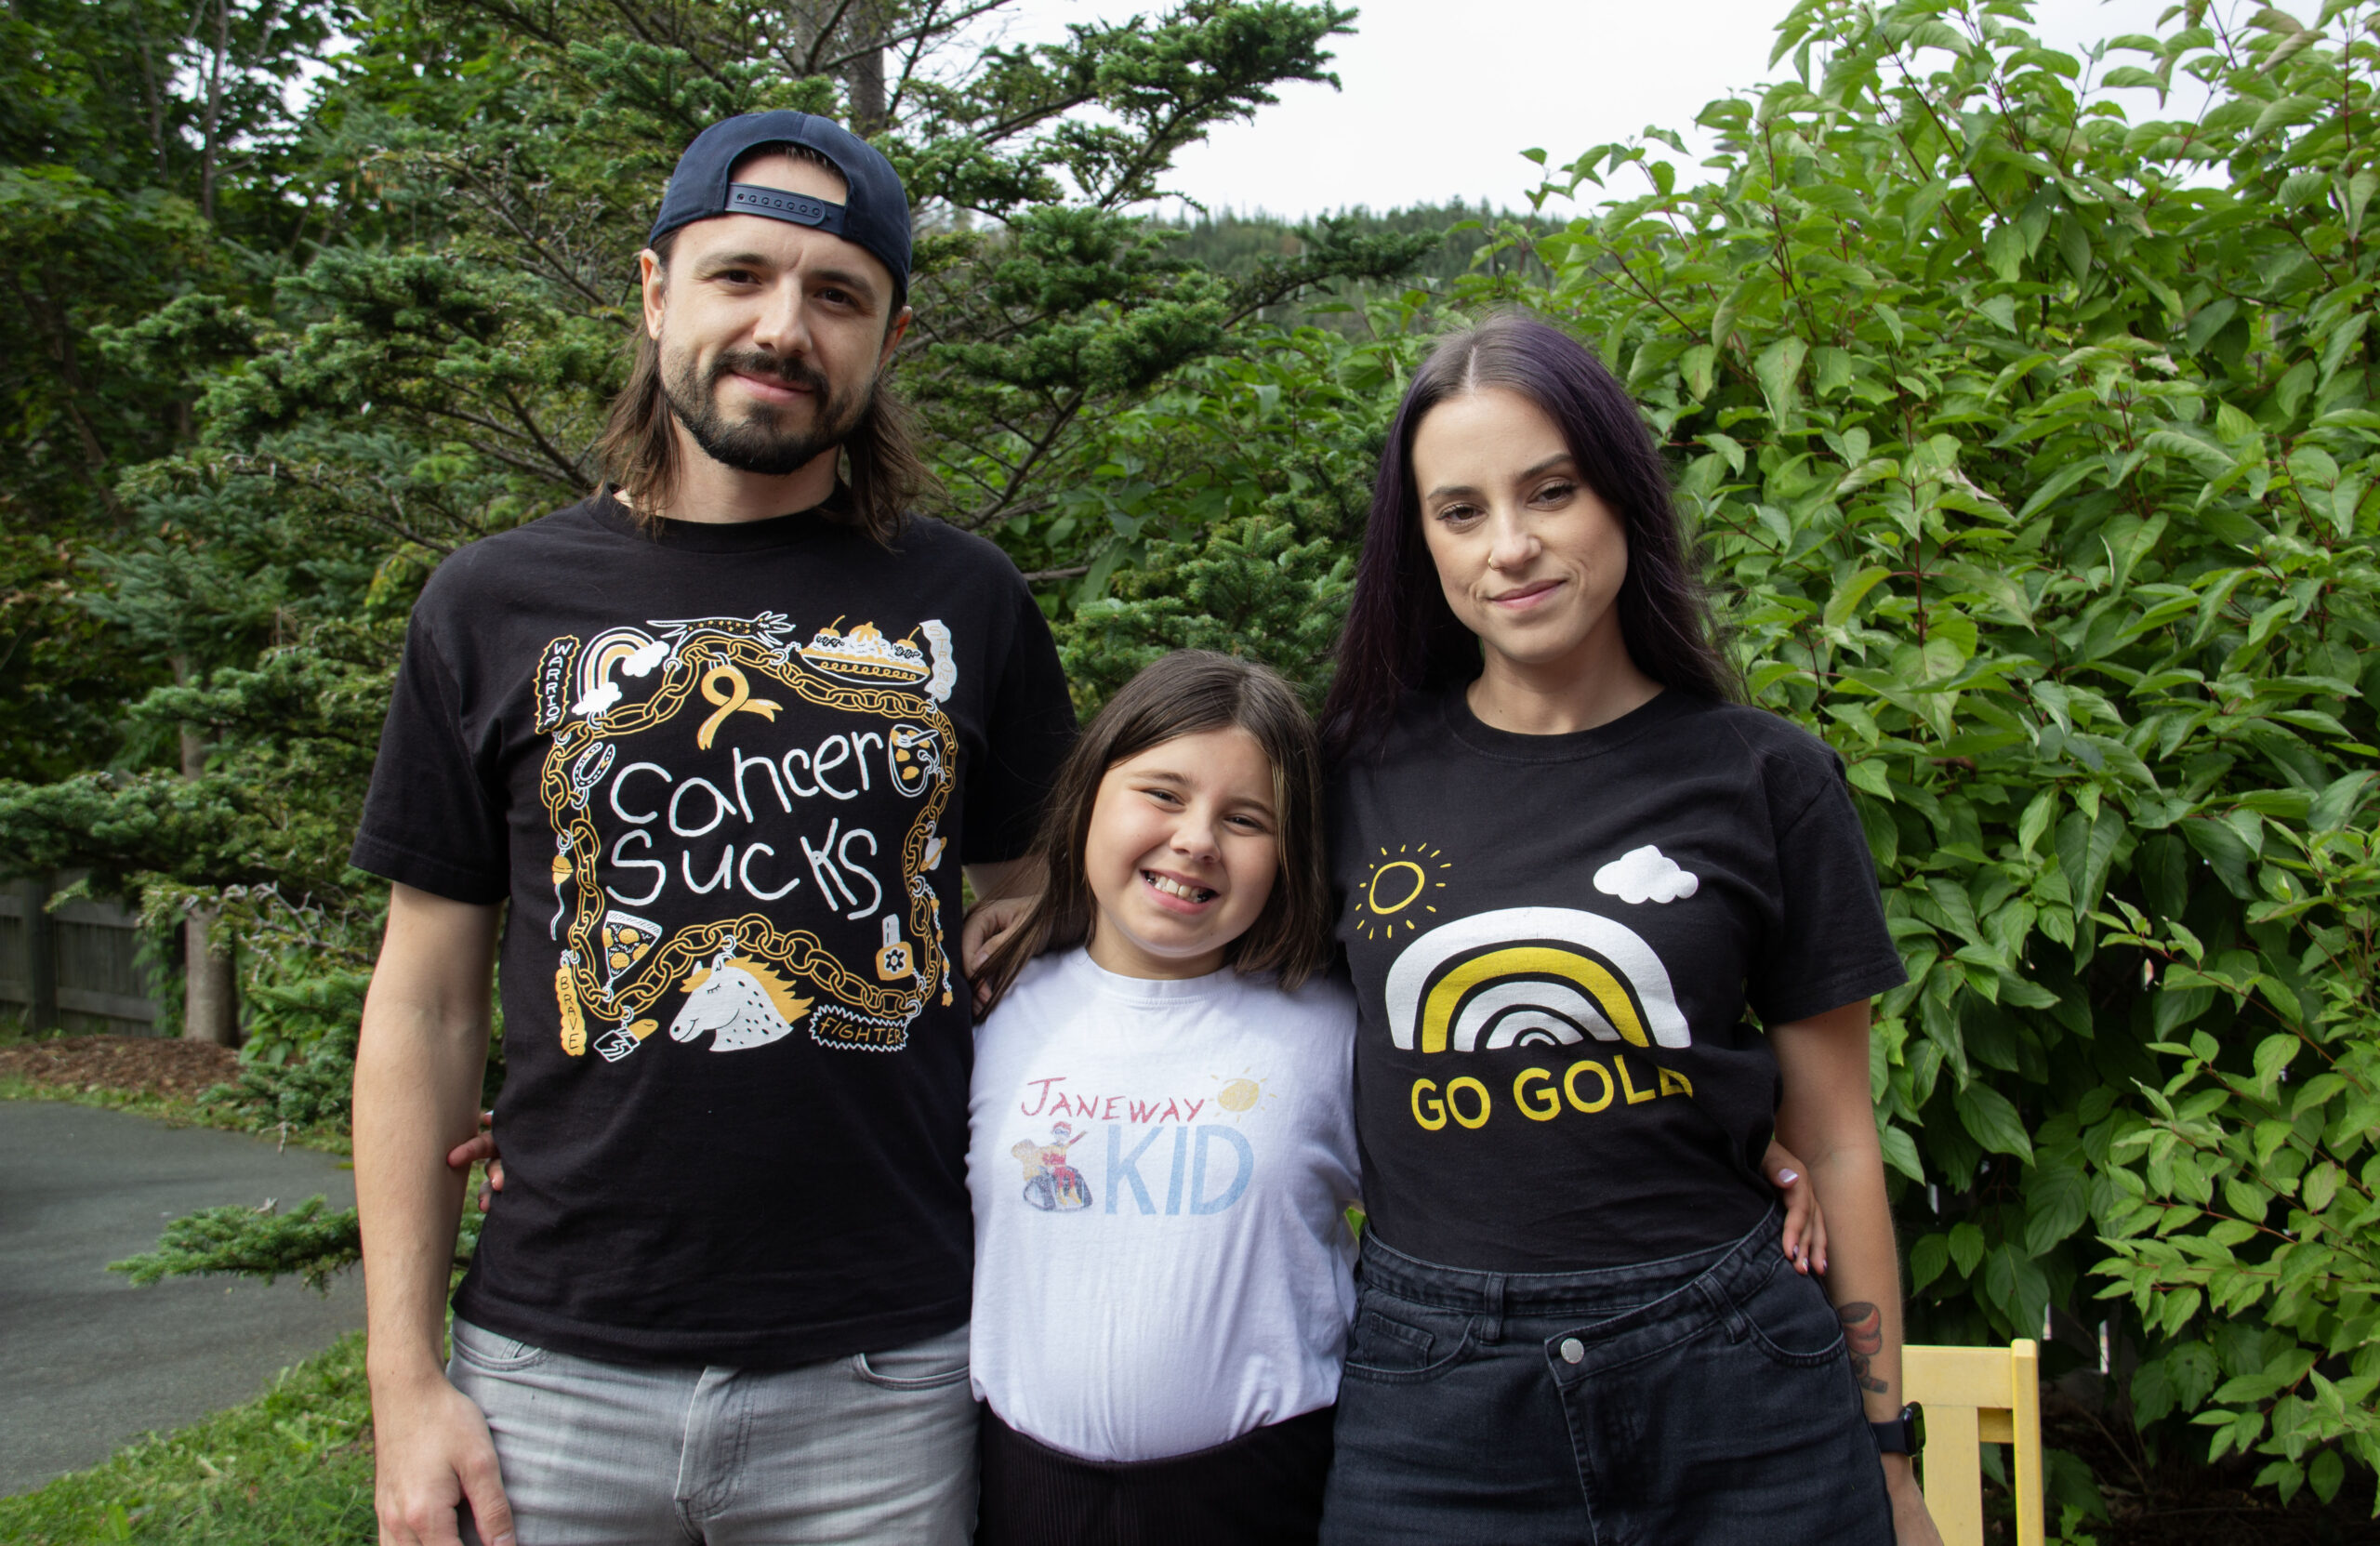 Abigale Latoszeck stands wearing a white shirt that says "Janeway Kid". On her left is her dad, wearing a black t-shirt that says "cancer sucks", and on her right, her mom is wearing a black t-shirt that says "go gold". They are outside with a background of green trees